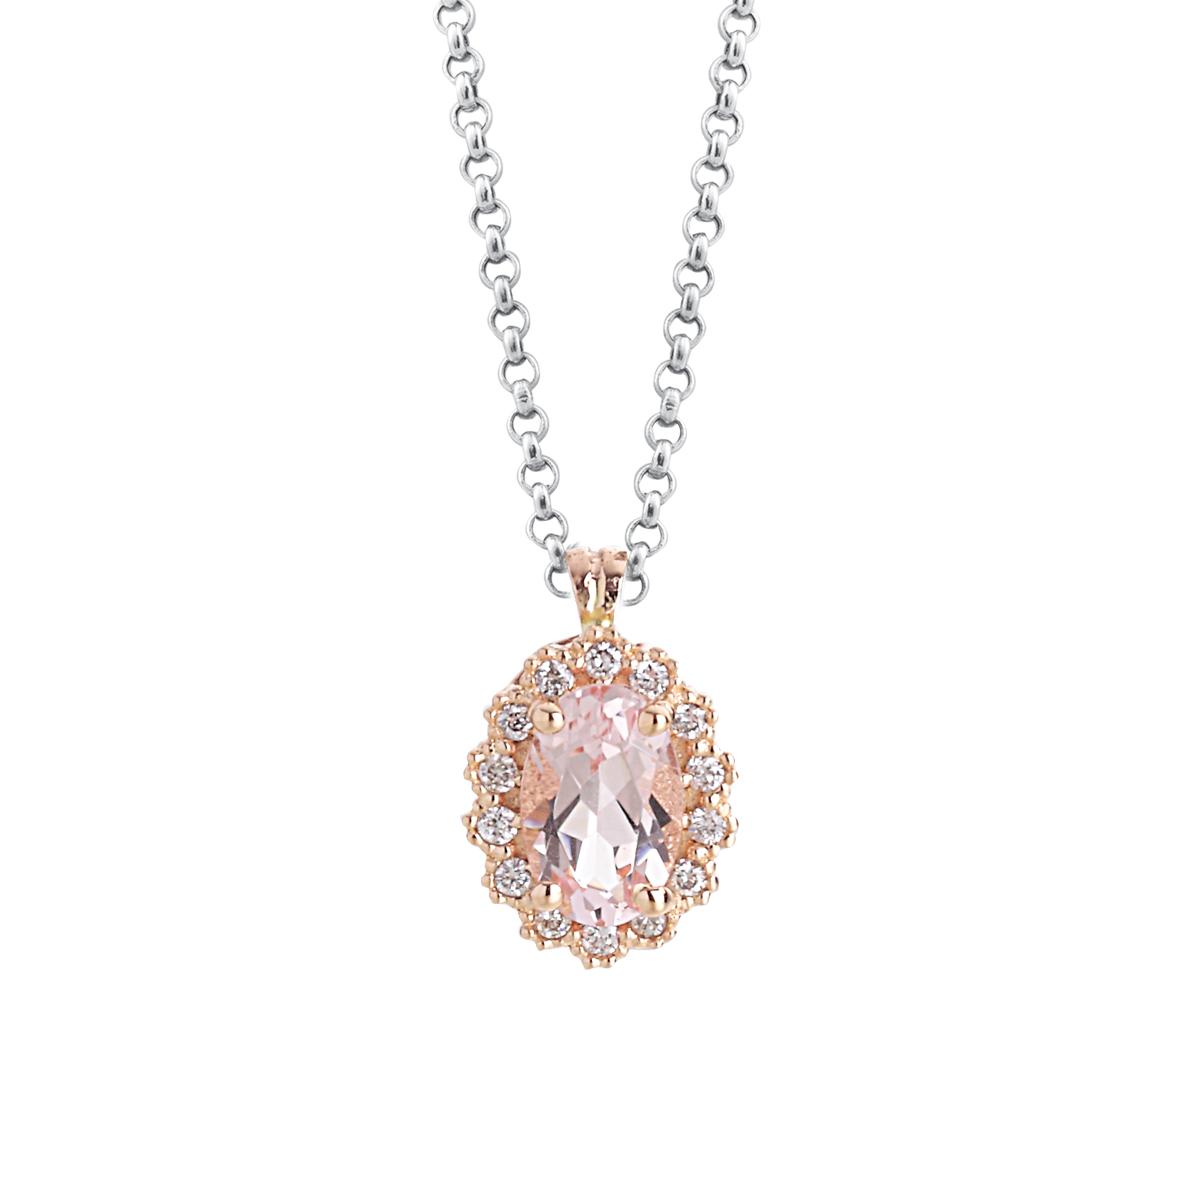 18kt gold necklace with diamonds and morganite - CD537/MO-LH